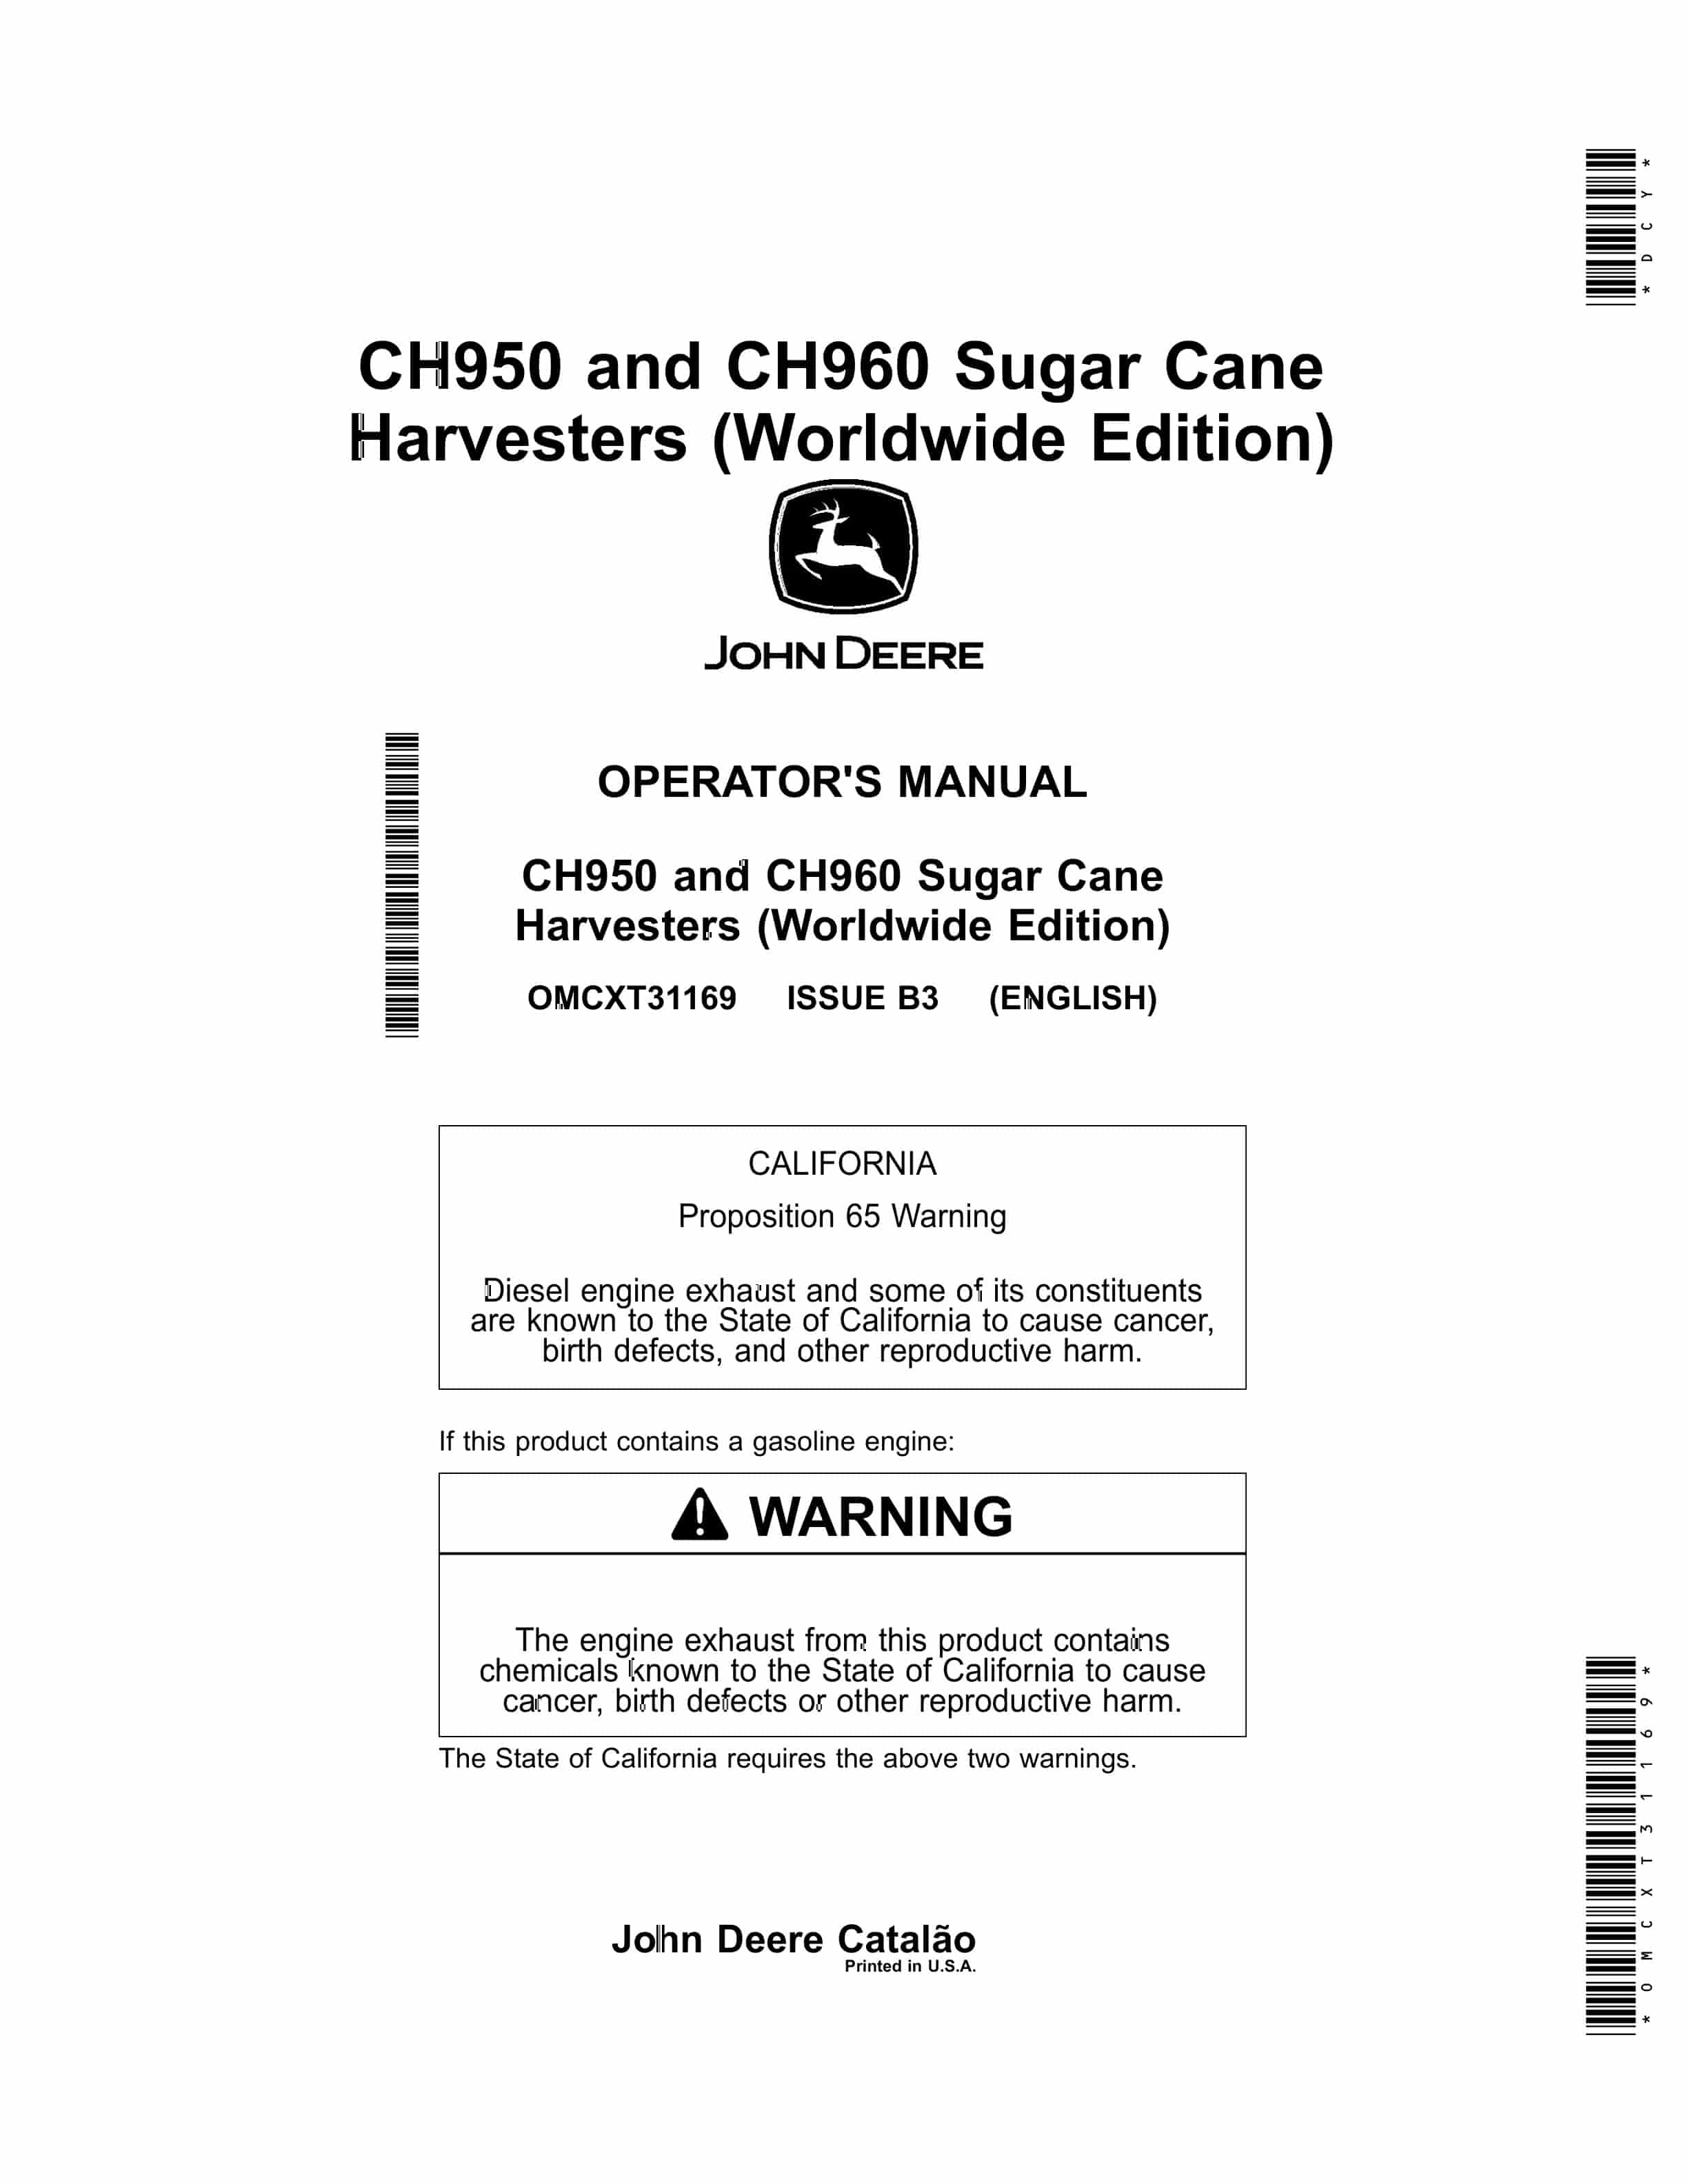 John Deere CH950 and CH960 Sugar Cane Harvesters Operator Manual OMCXT31169 1